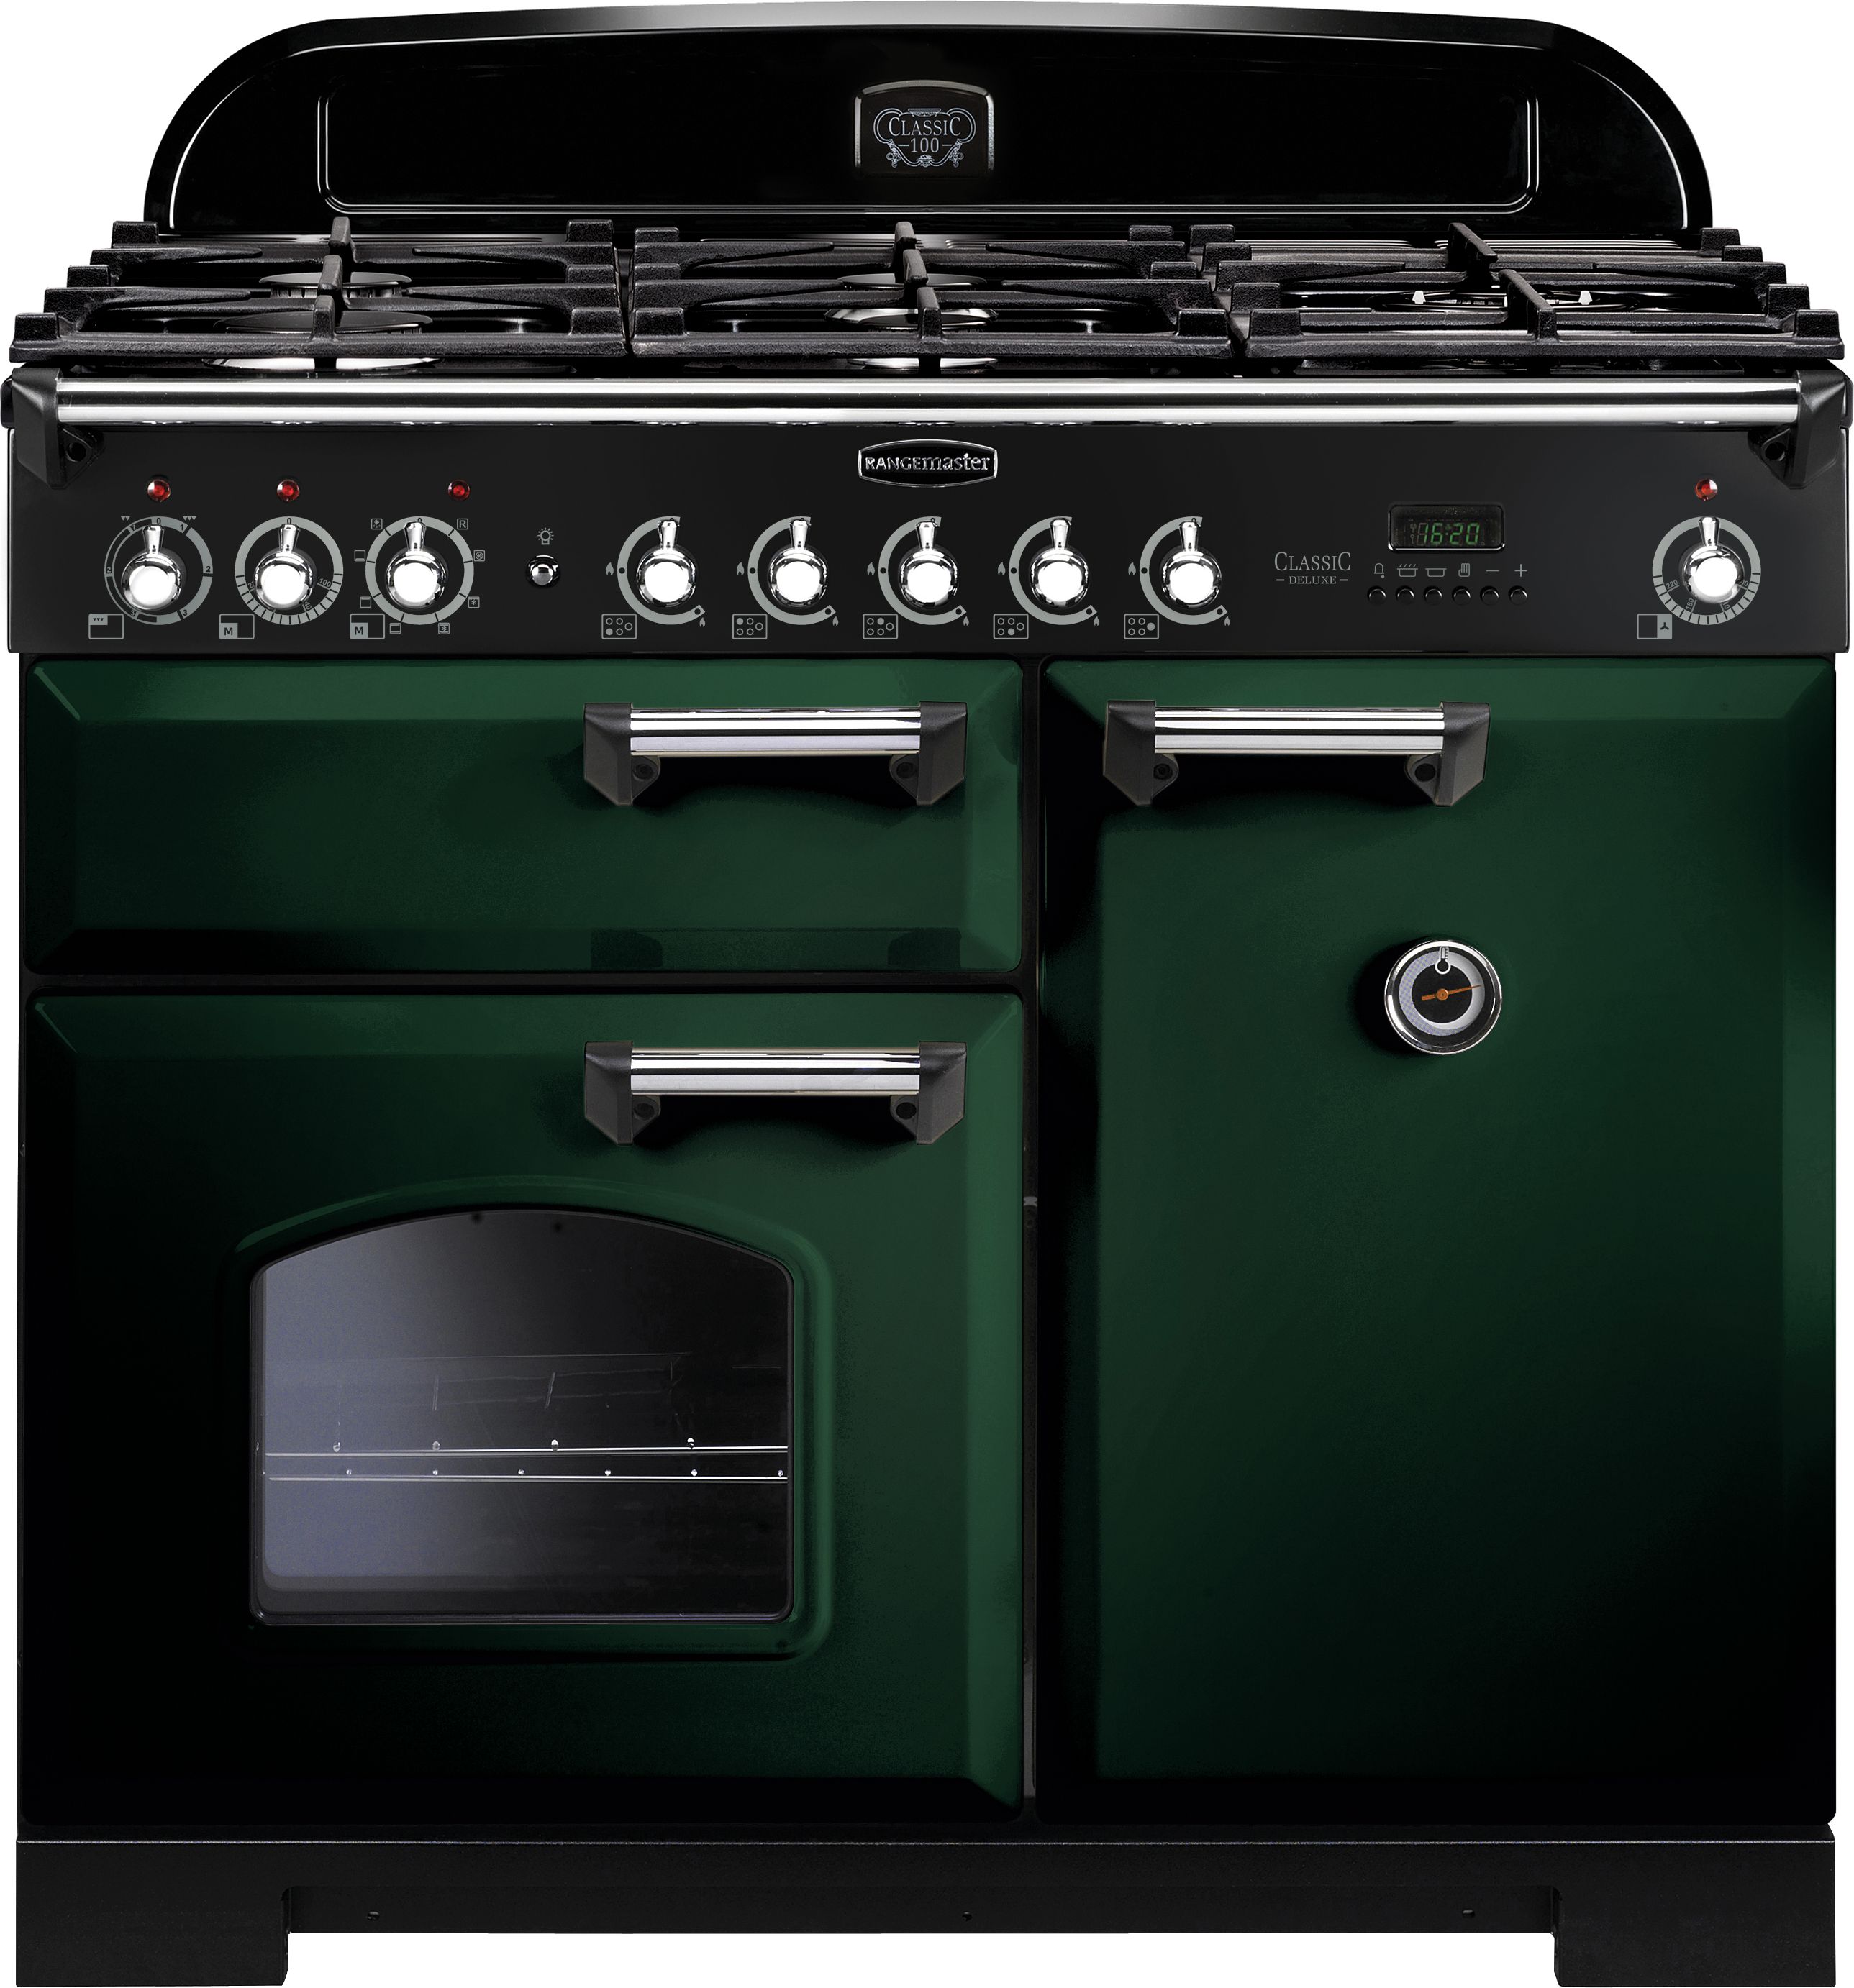 Rangemaster Classic Deluxe CDL100DFFRG/C 100cm Dual Fuel Range Cooker - Racing Green / Chrome - A/A Rated, Green